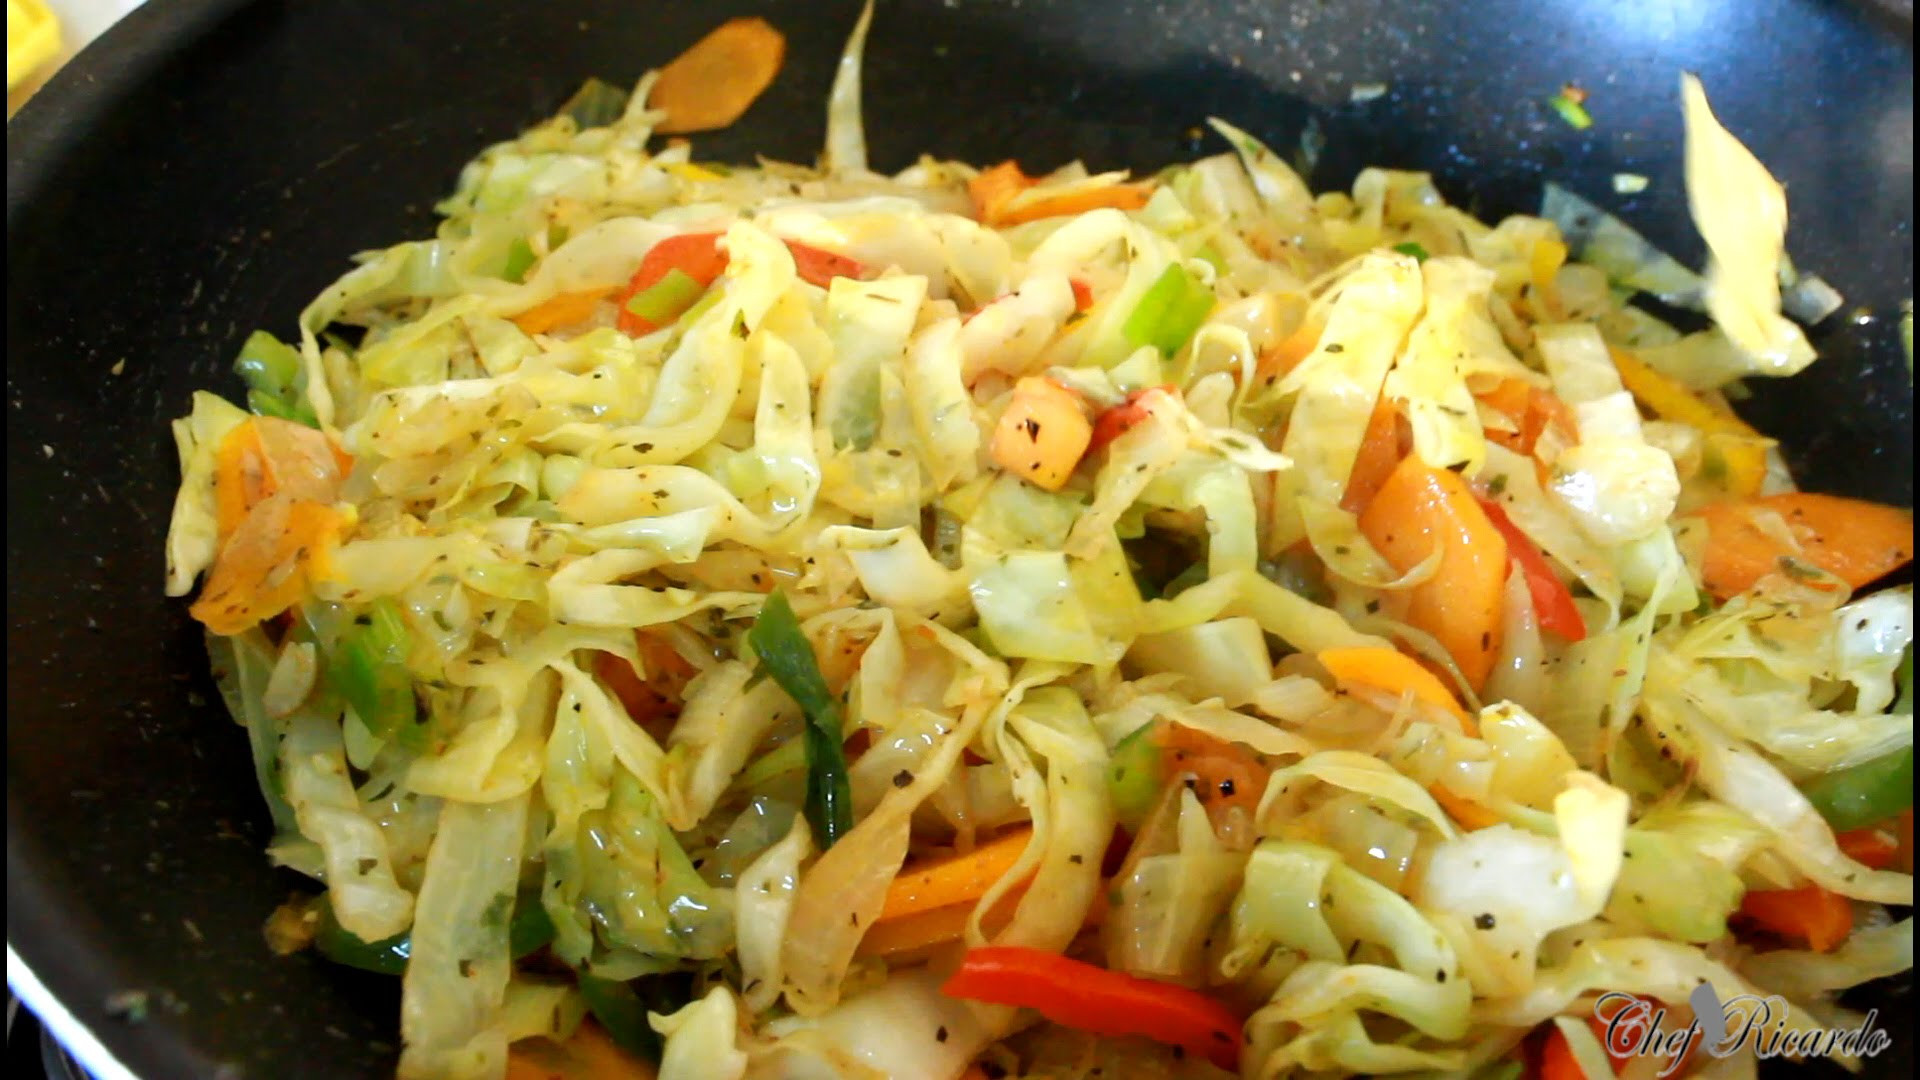 Healthy Sunday Dinner Ideas
 Healthy Ve able Fry Up Cabbage For Sunday Dinner